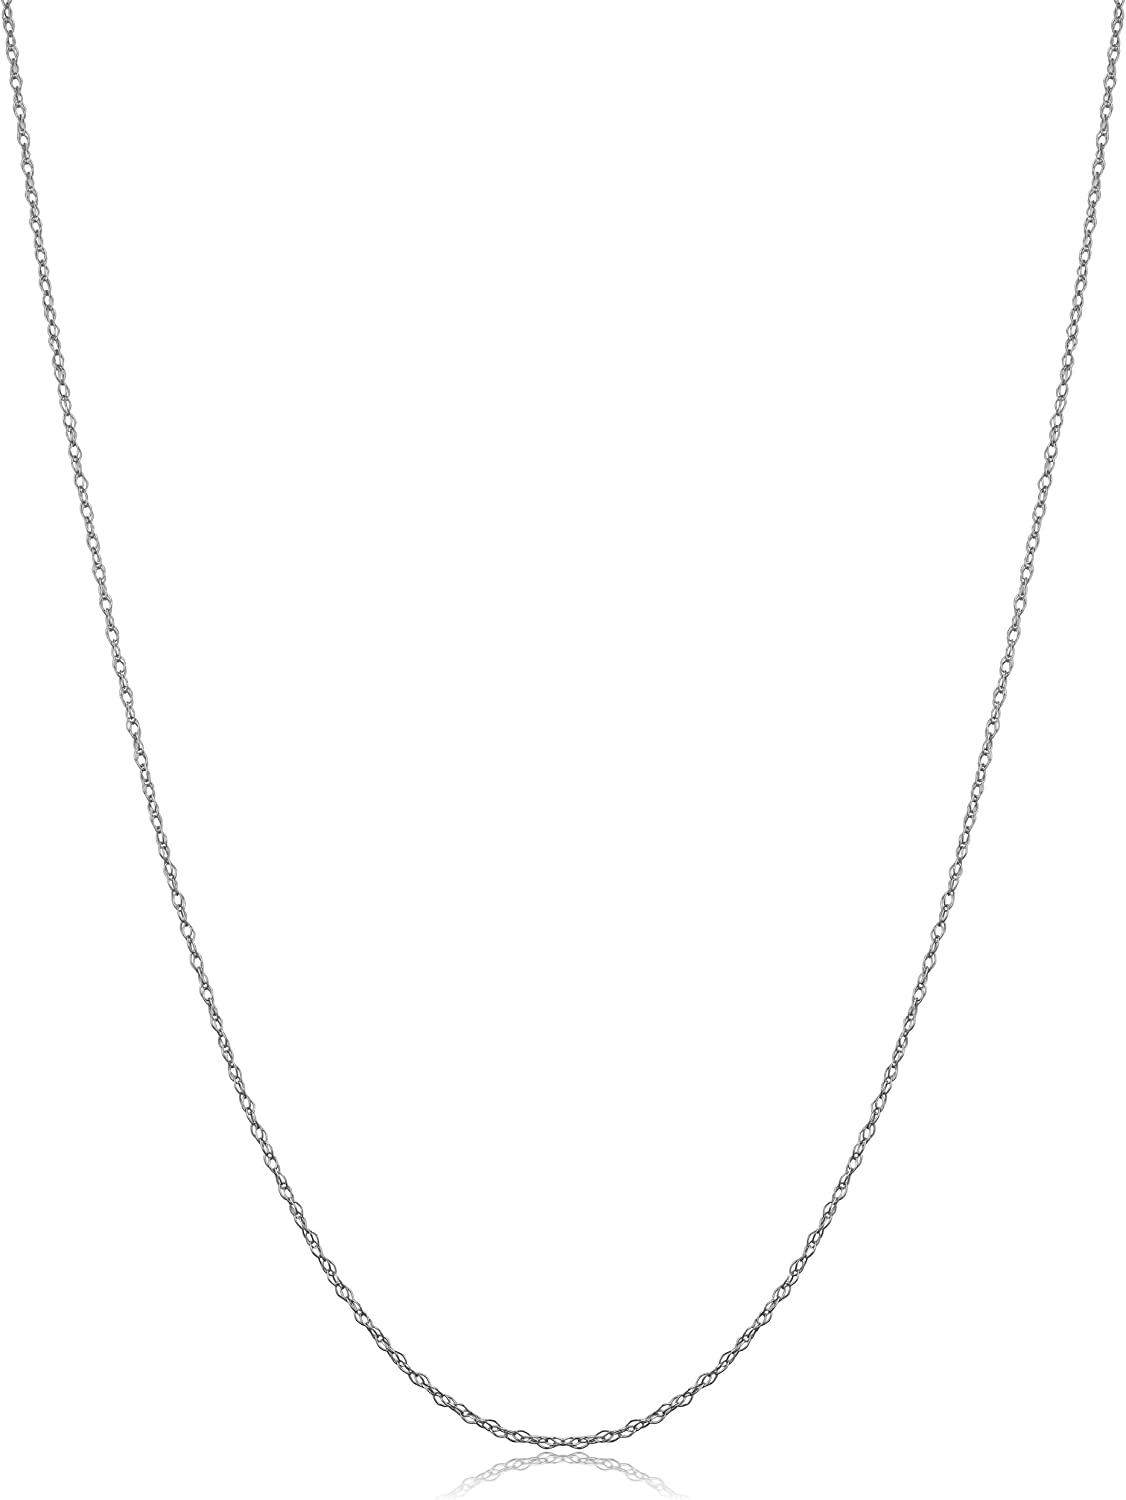 10k White Gold Delicate Lightweigtht Thin Rope Chain Necklace For Women (14, 16, 18, 20, 24 or 30 inch - 0.7 mm)